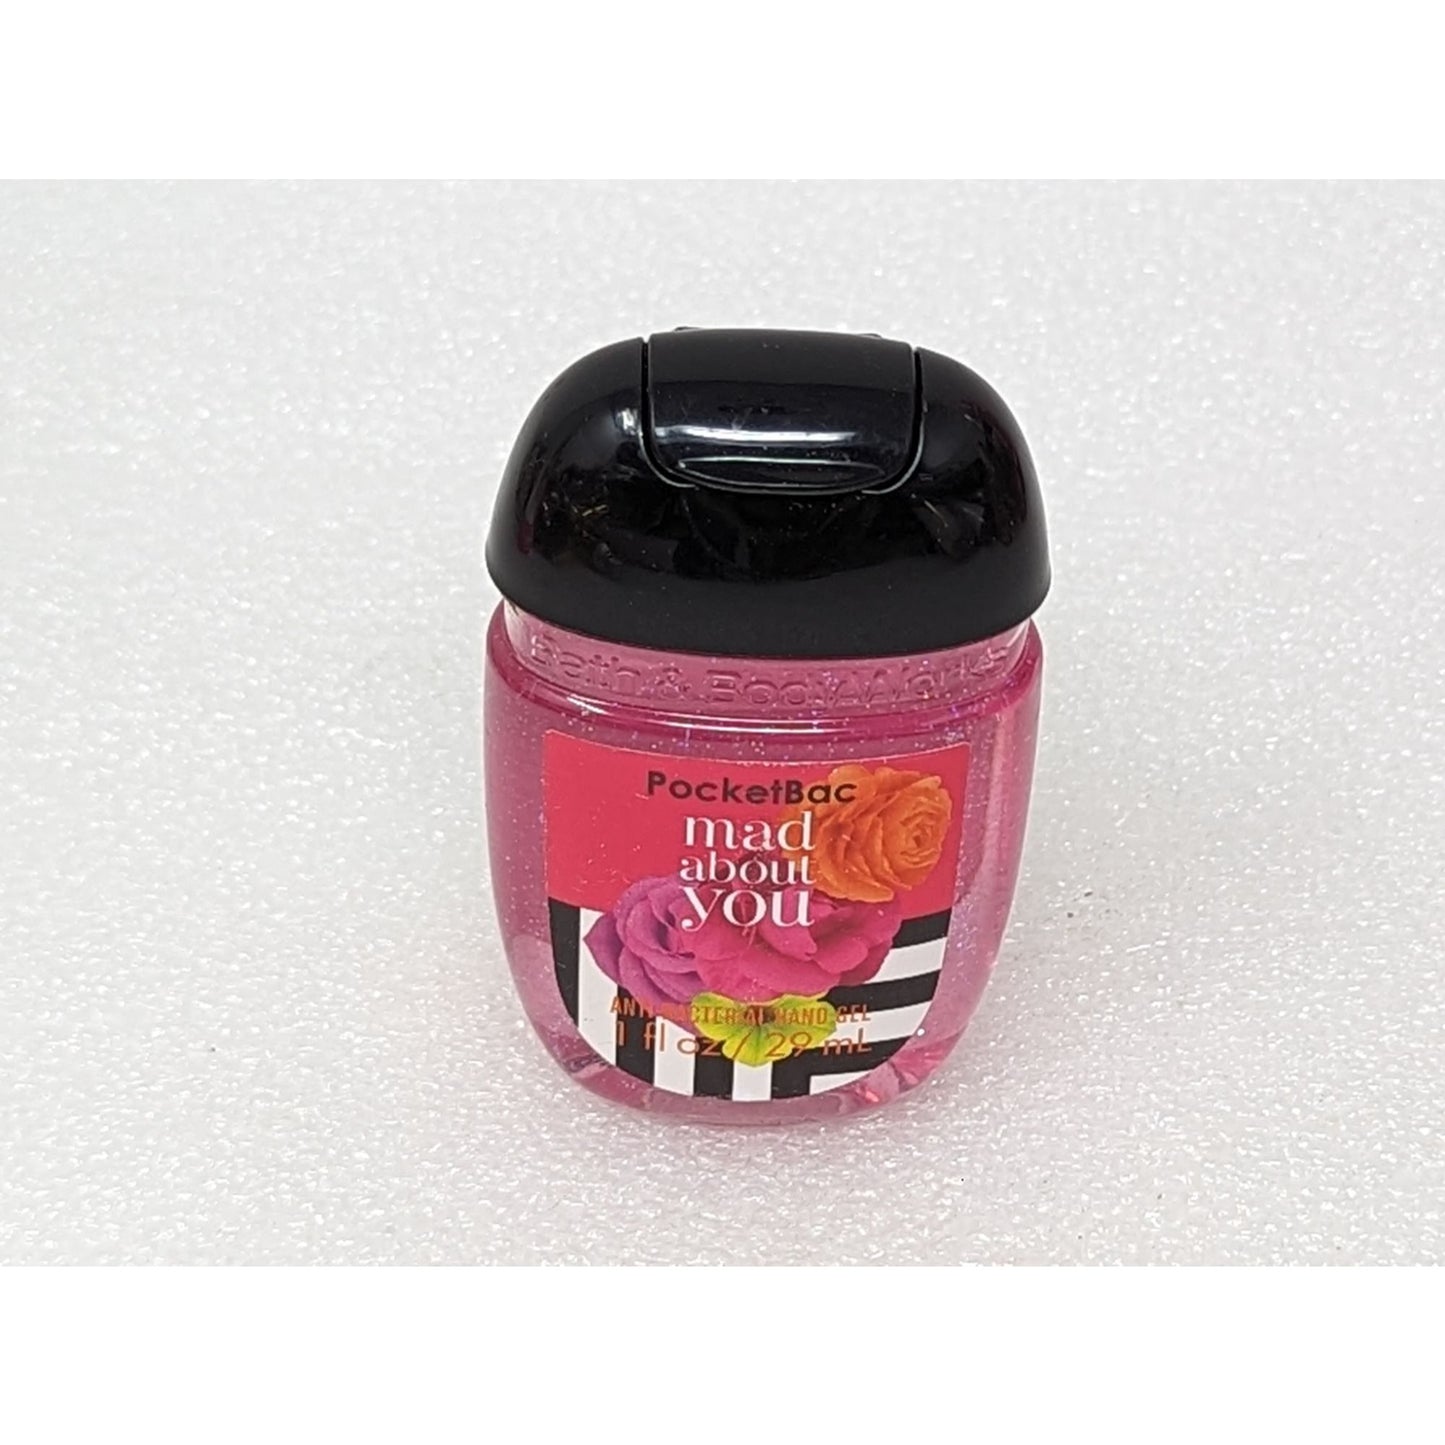 Bath & Body Works Pocketbac Mad About You Antibacterial Hand Sanitizer Gel